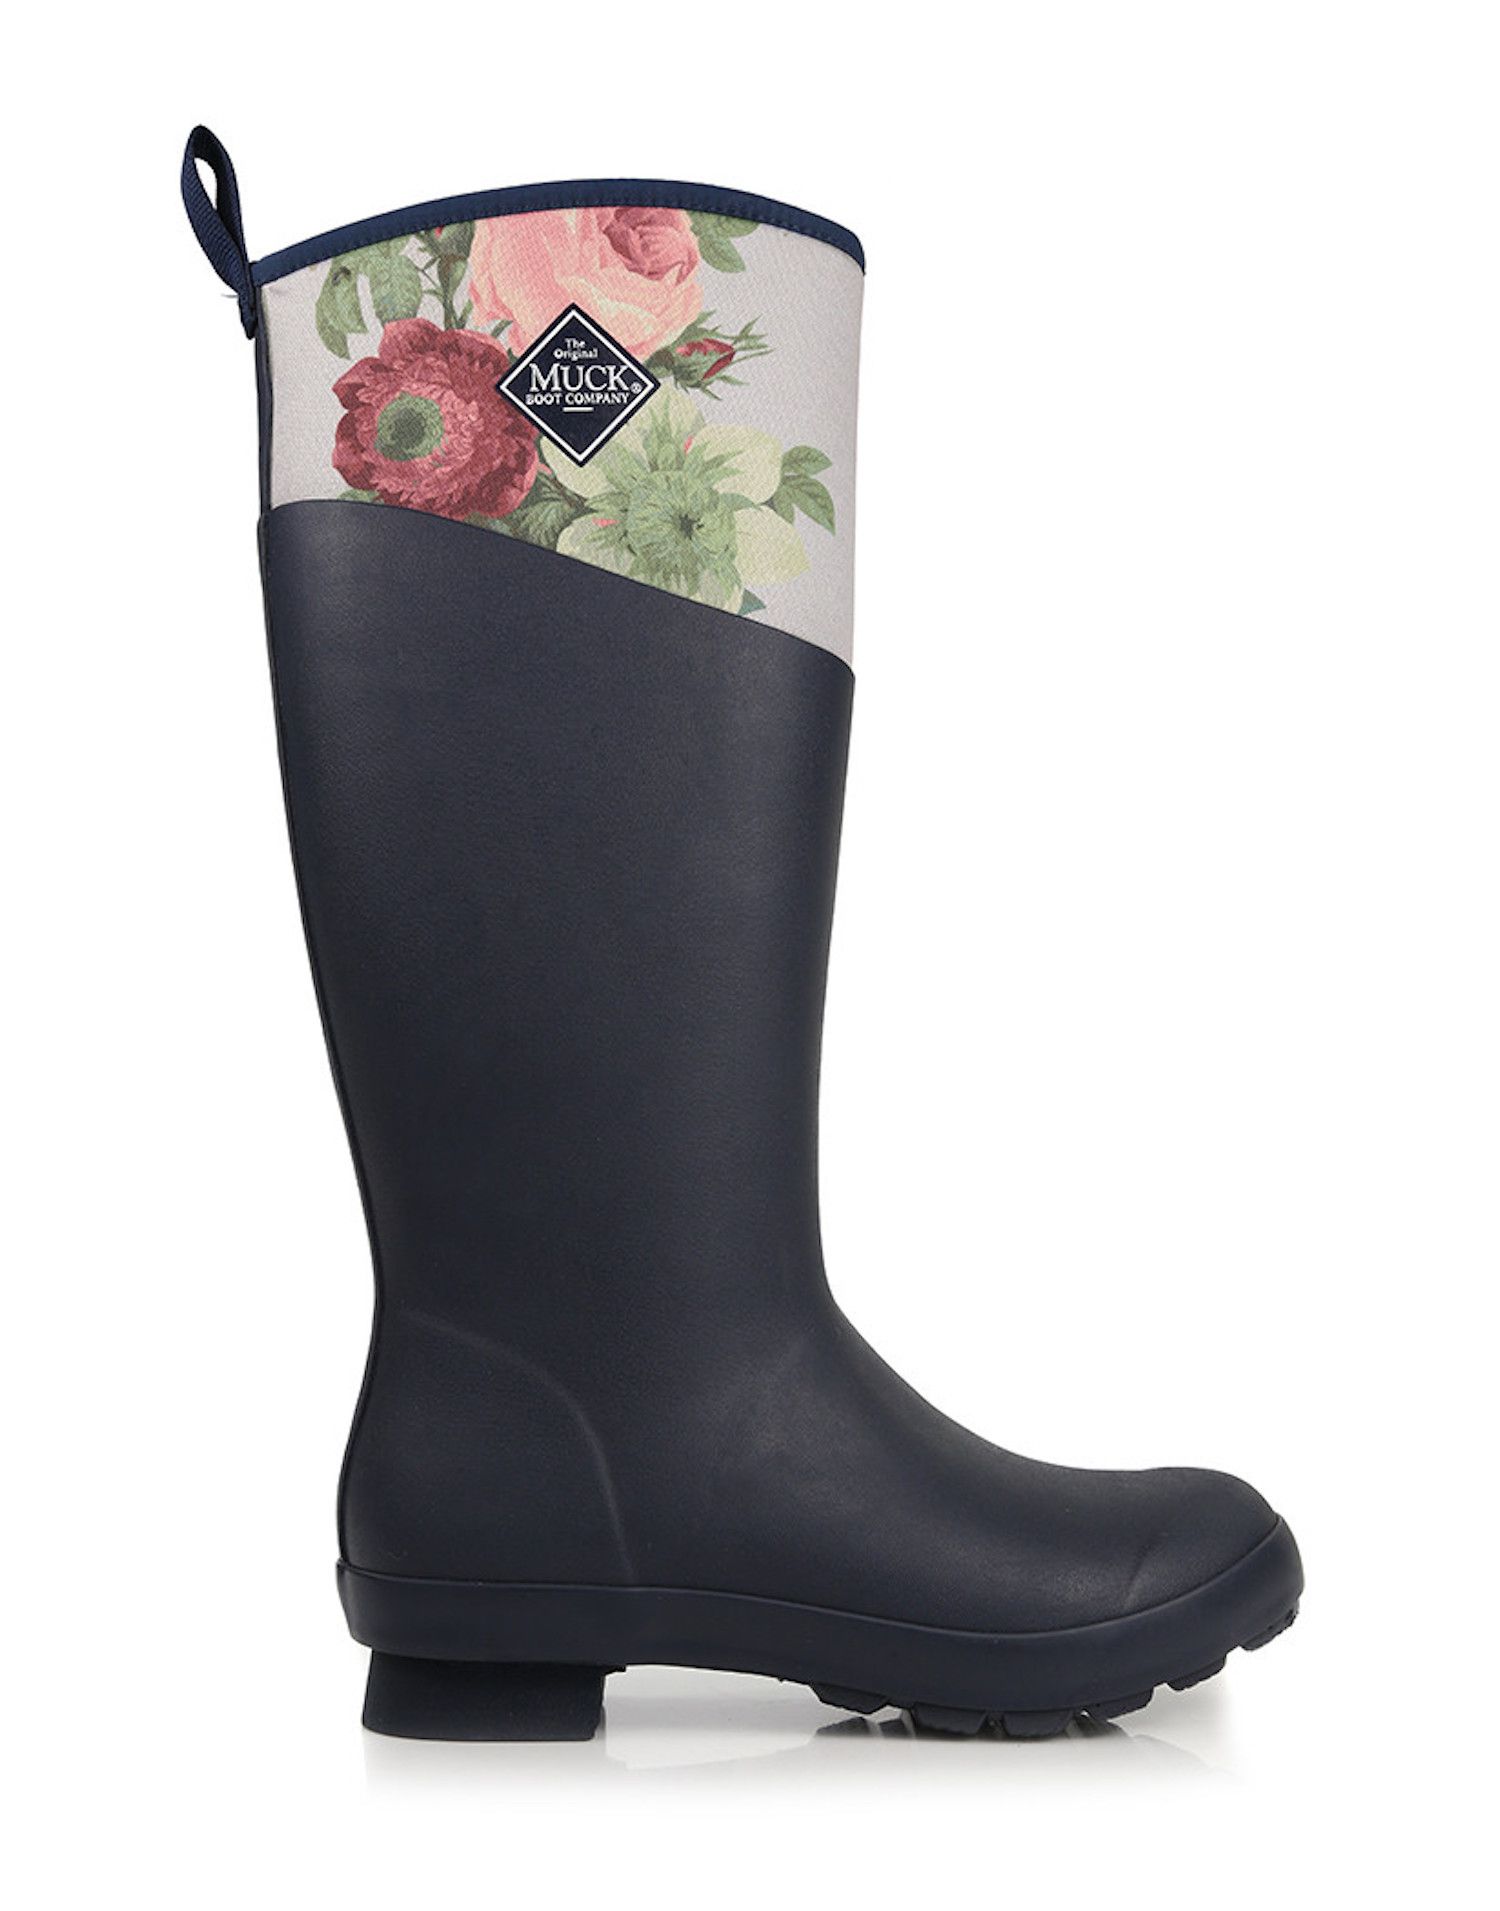 Muck Boot Tremont Tall Floral Print Wellies 